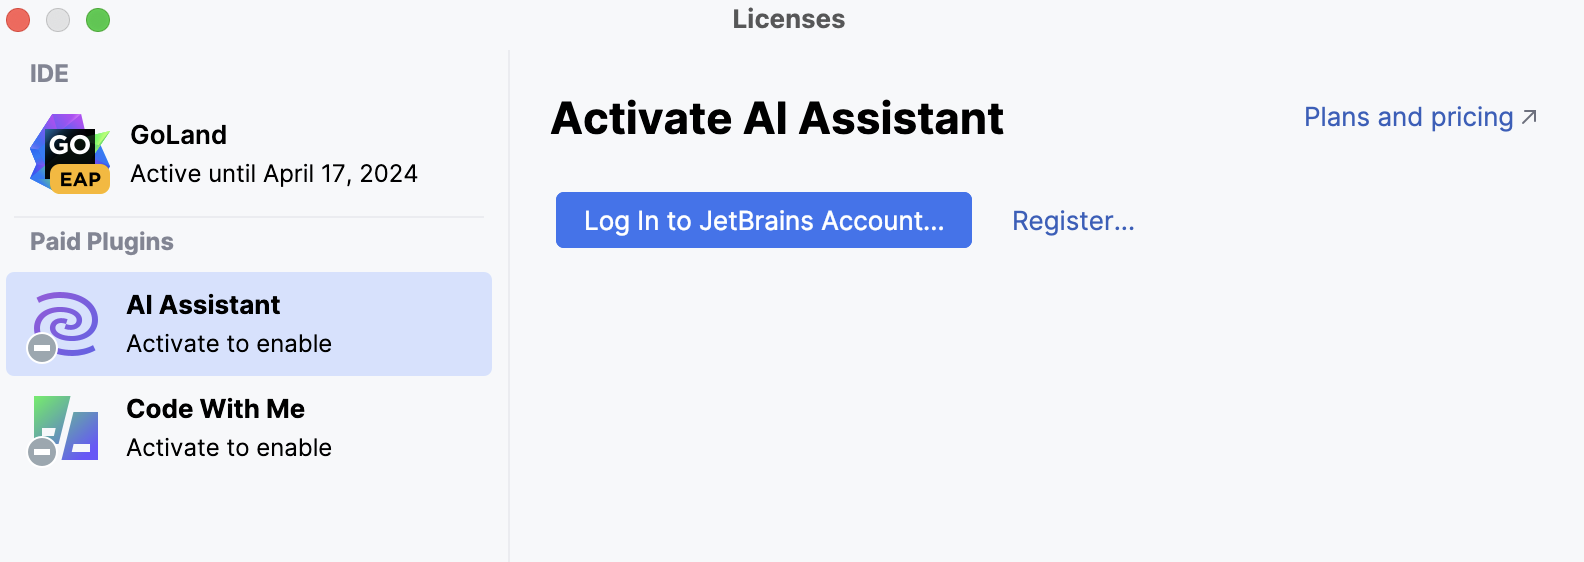 Licenses dialog with an option to log in to JetBrains account